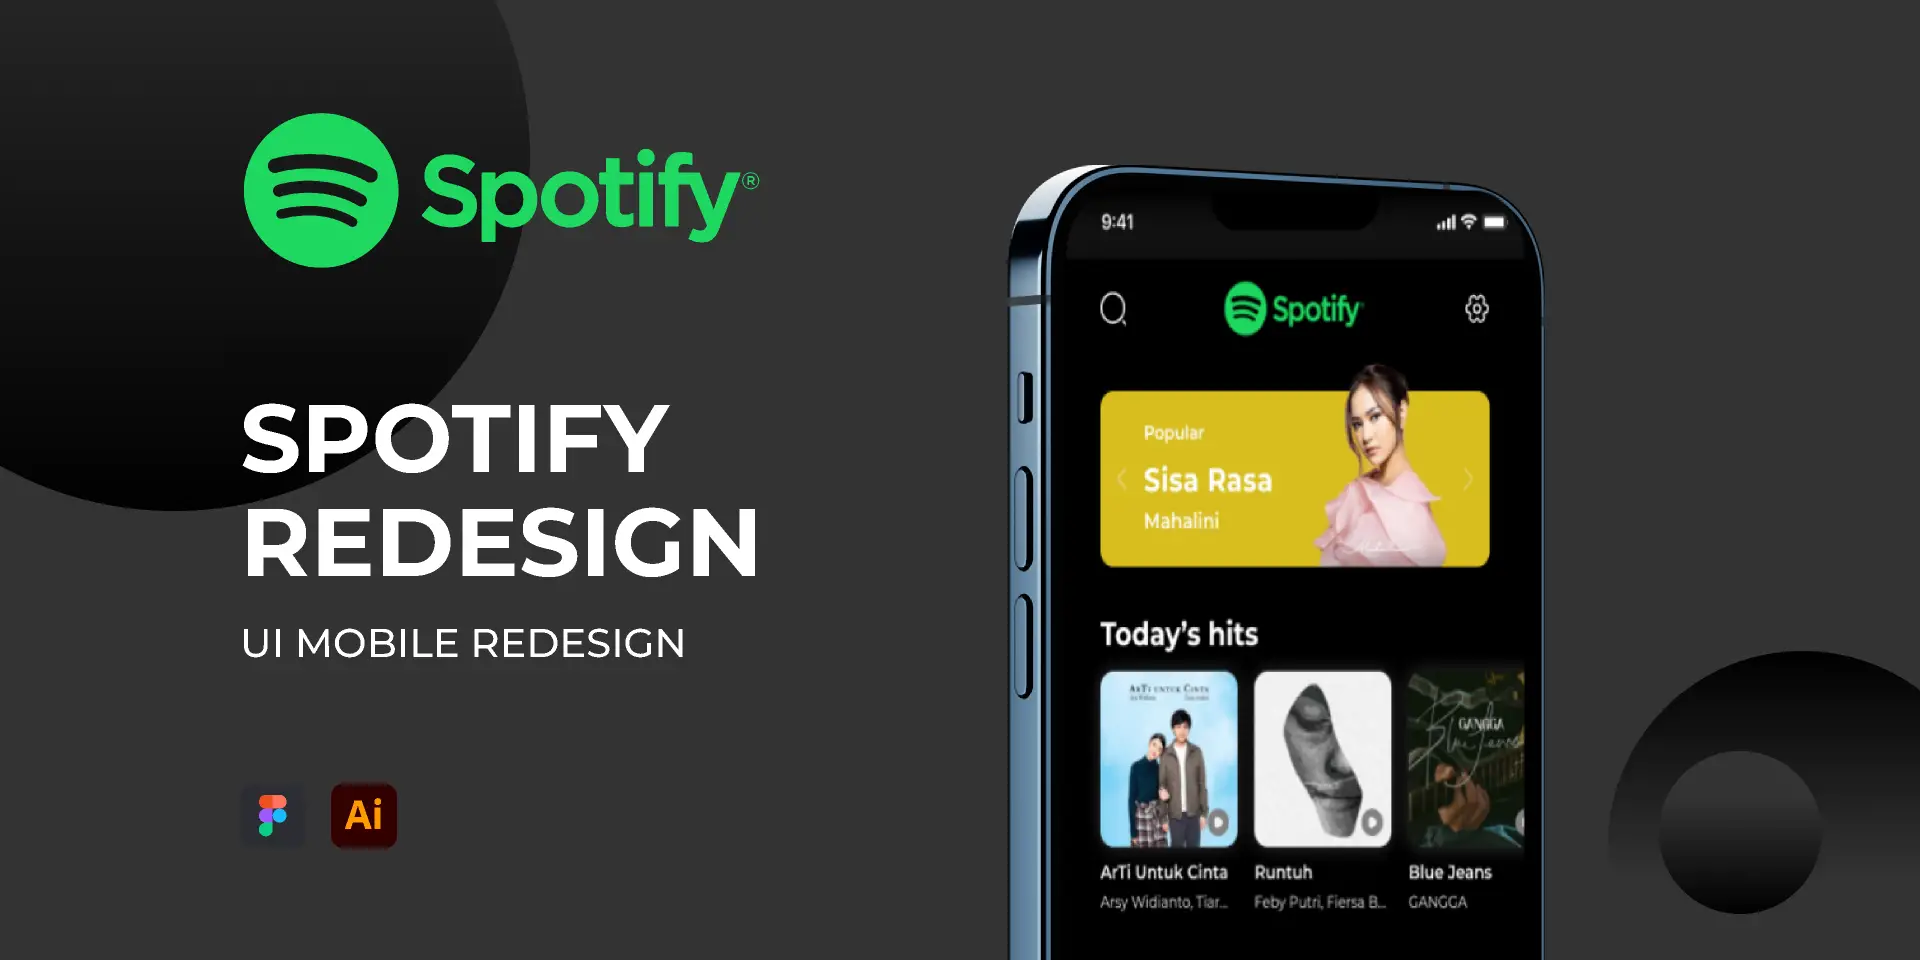 Spotify Redesign | UI Mobile Redesign - 